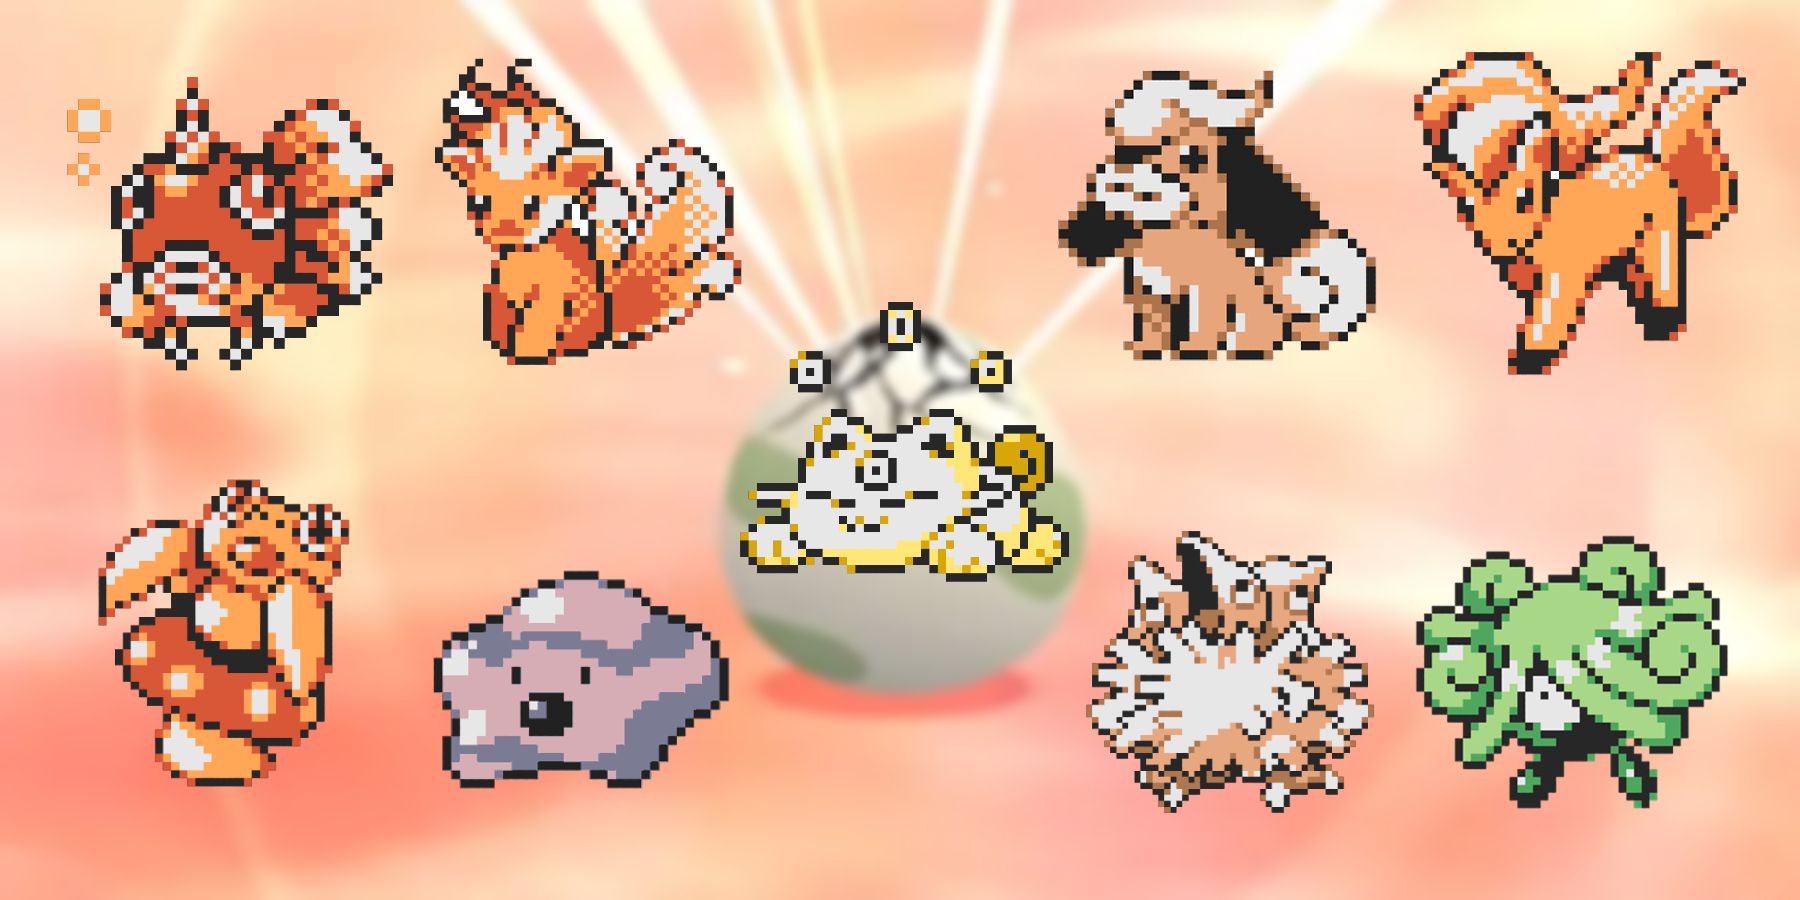 Beta Baby Pokemon scrapped from Pokemon Gold and Silver